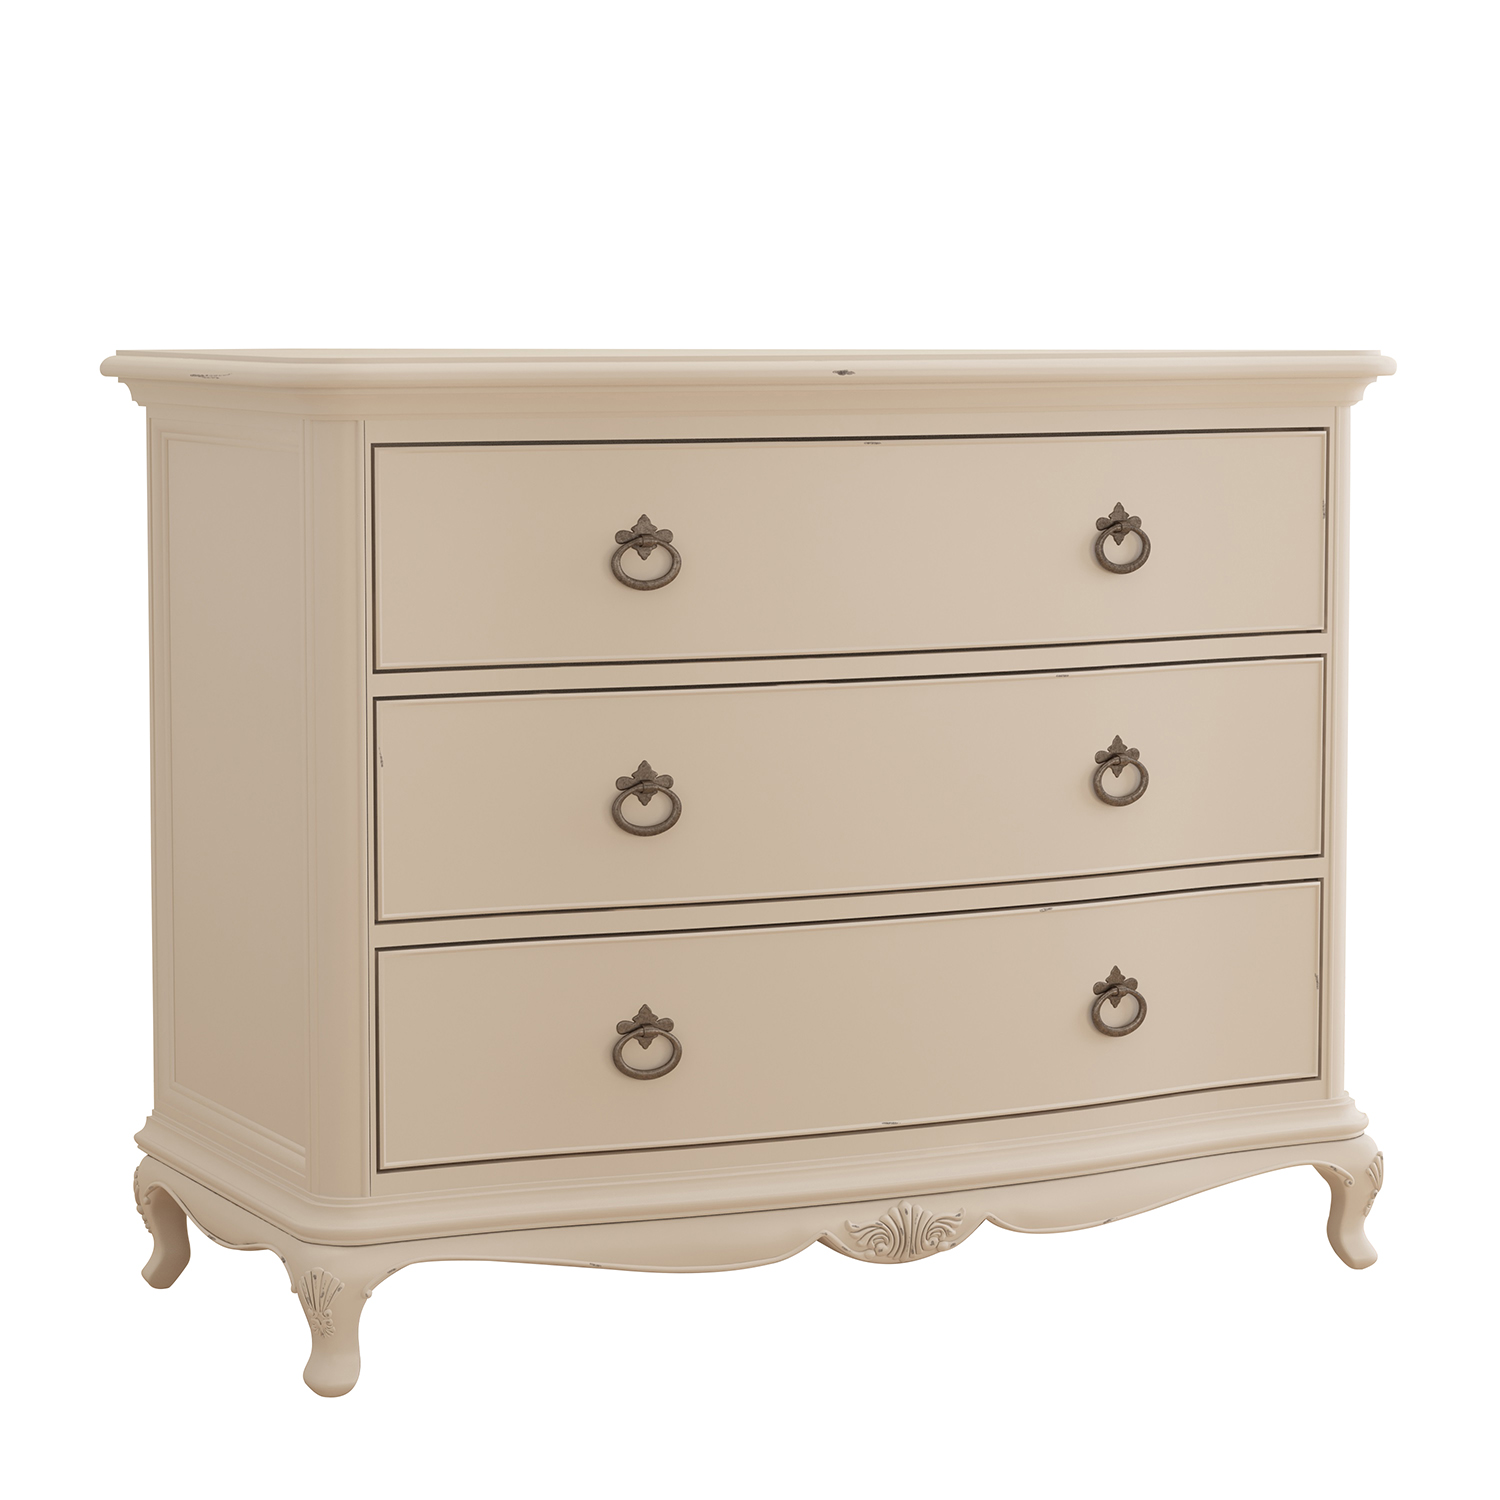 Willis & Gambier Ivory 3 Drawer Low Chest